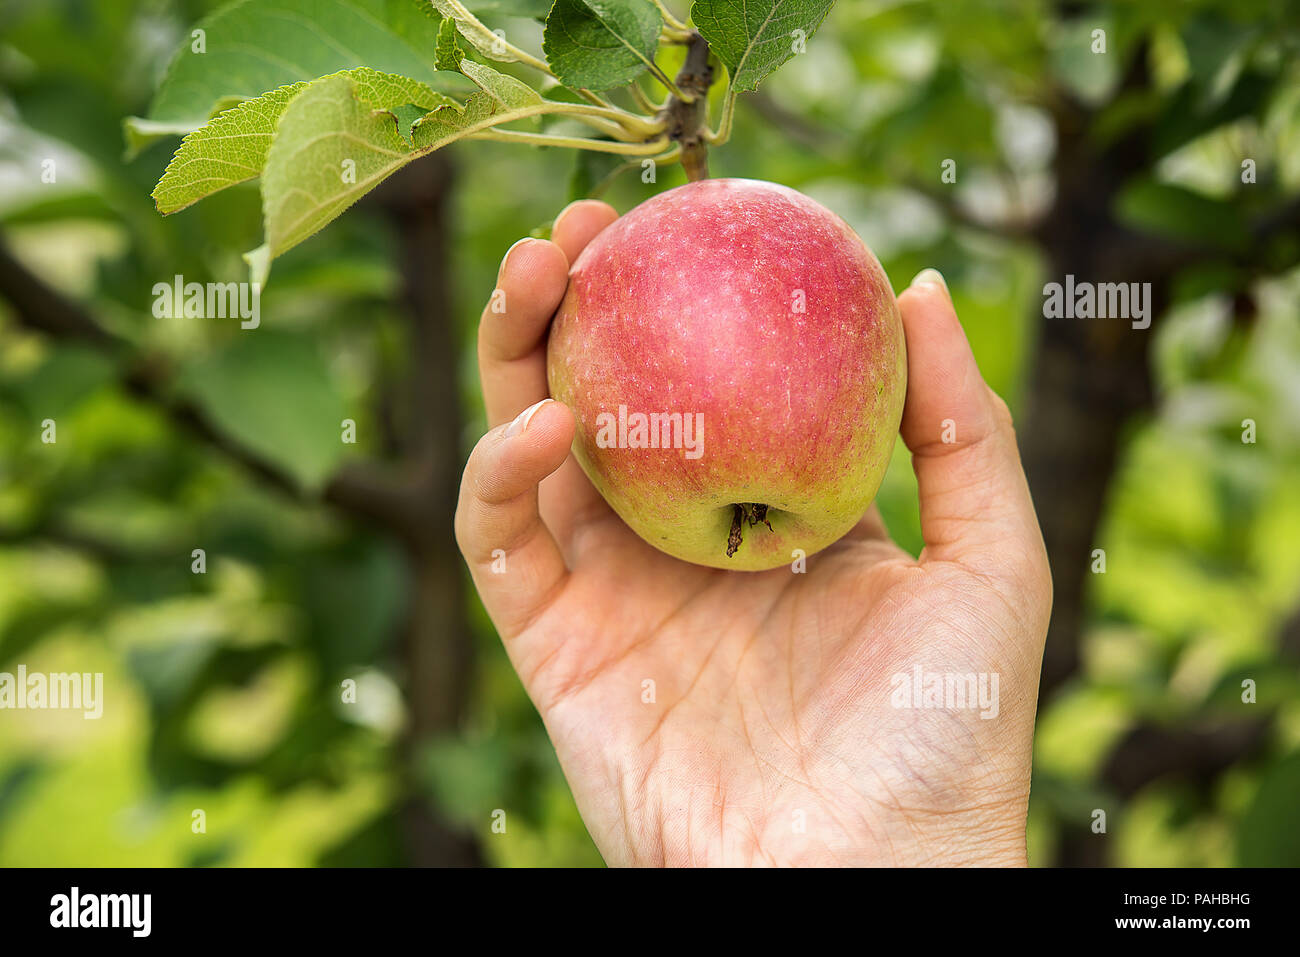 Red and yellow apple is hanging on real tree branch at orchard garden. Woman's hand is holding apple just before picking it. Harvest time and healthy  Stock Photo